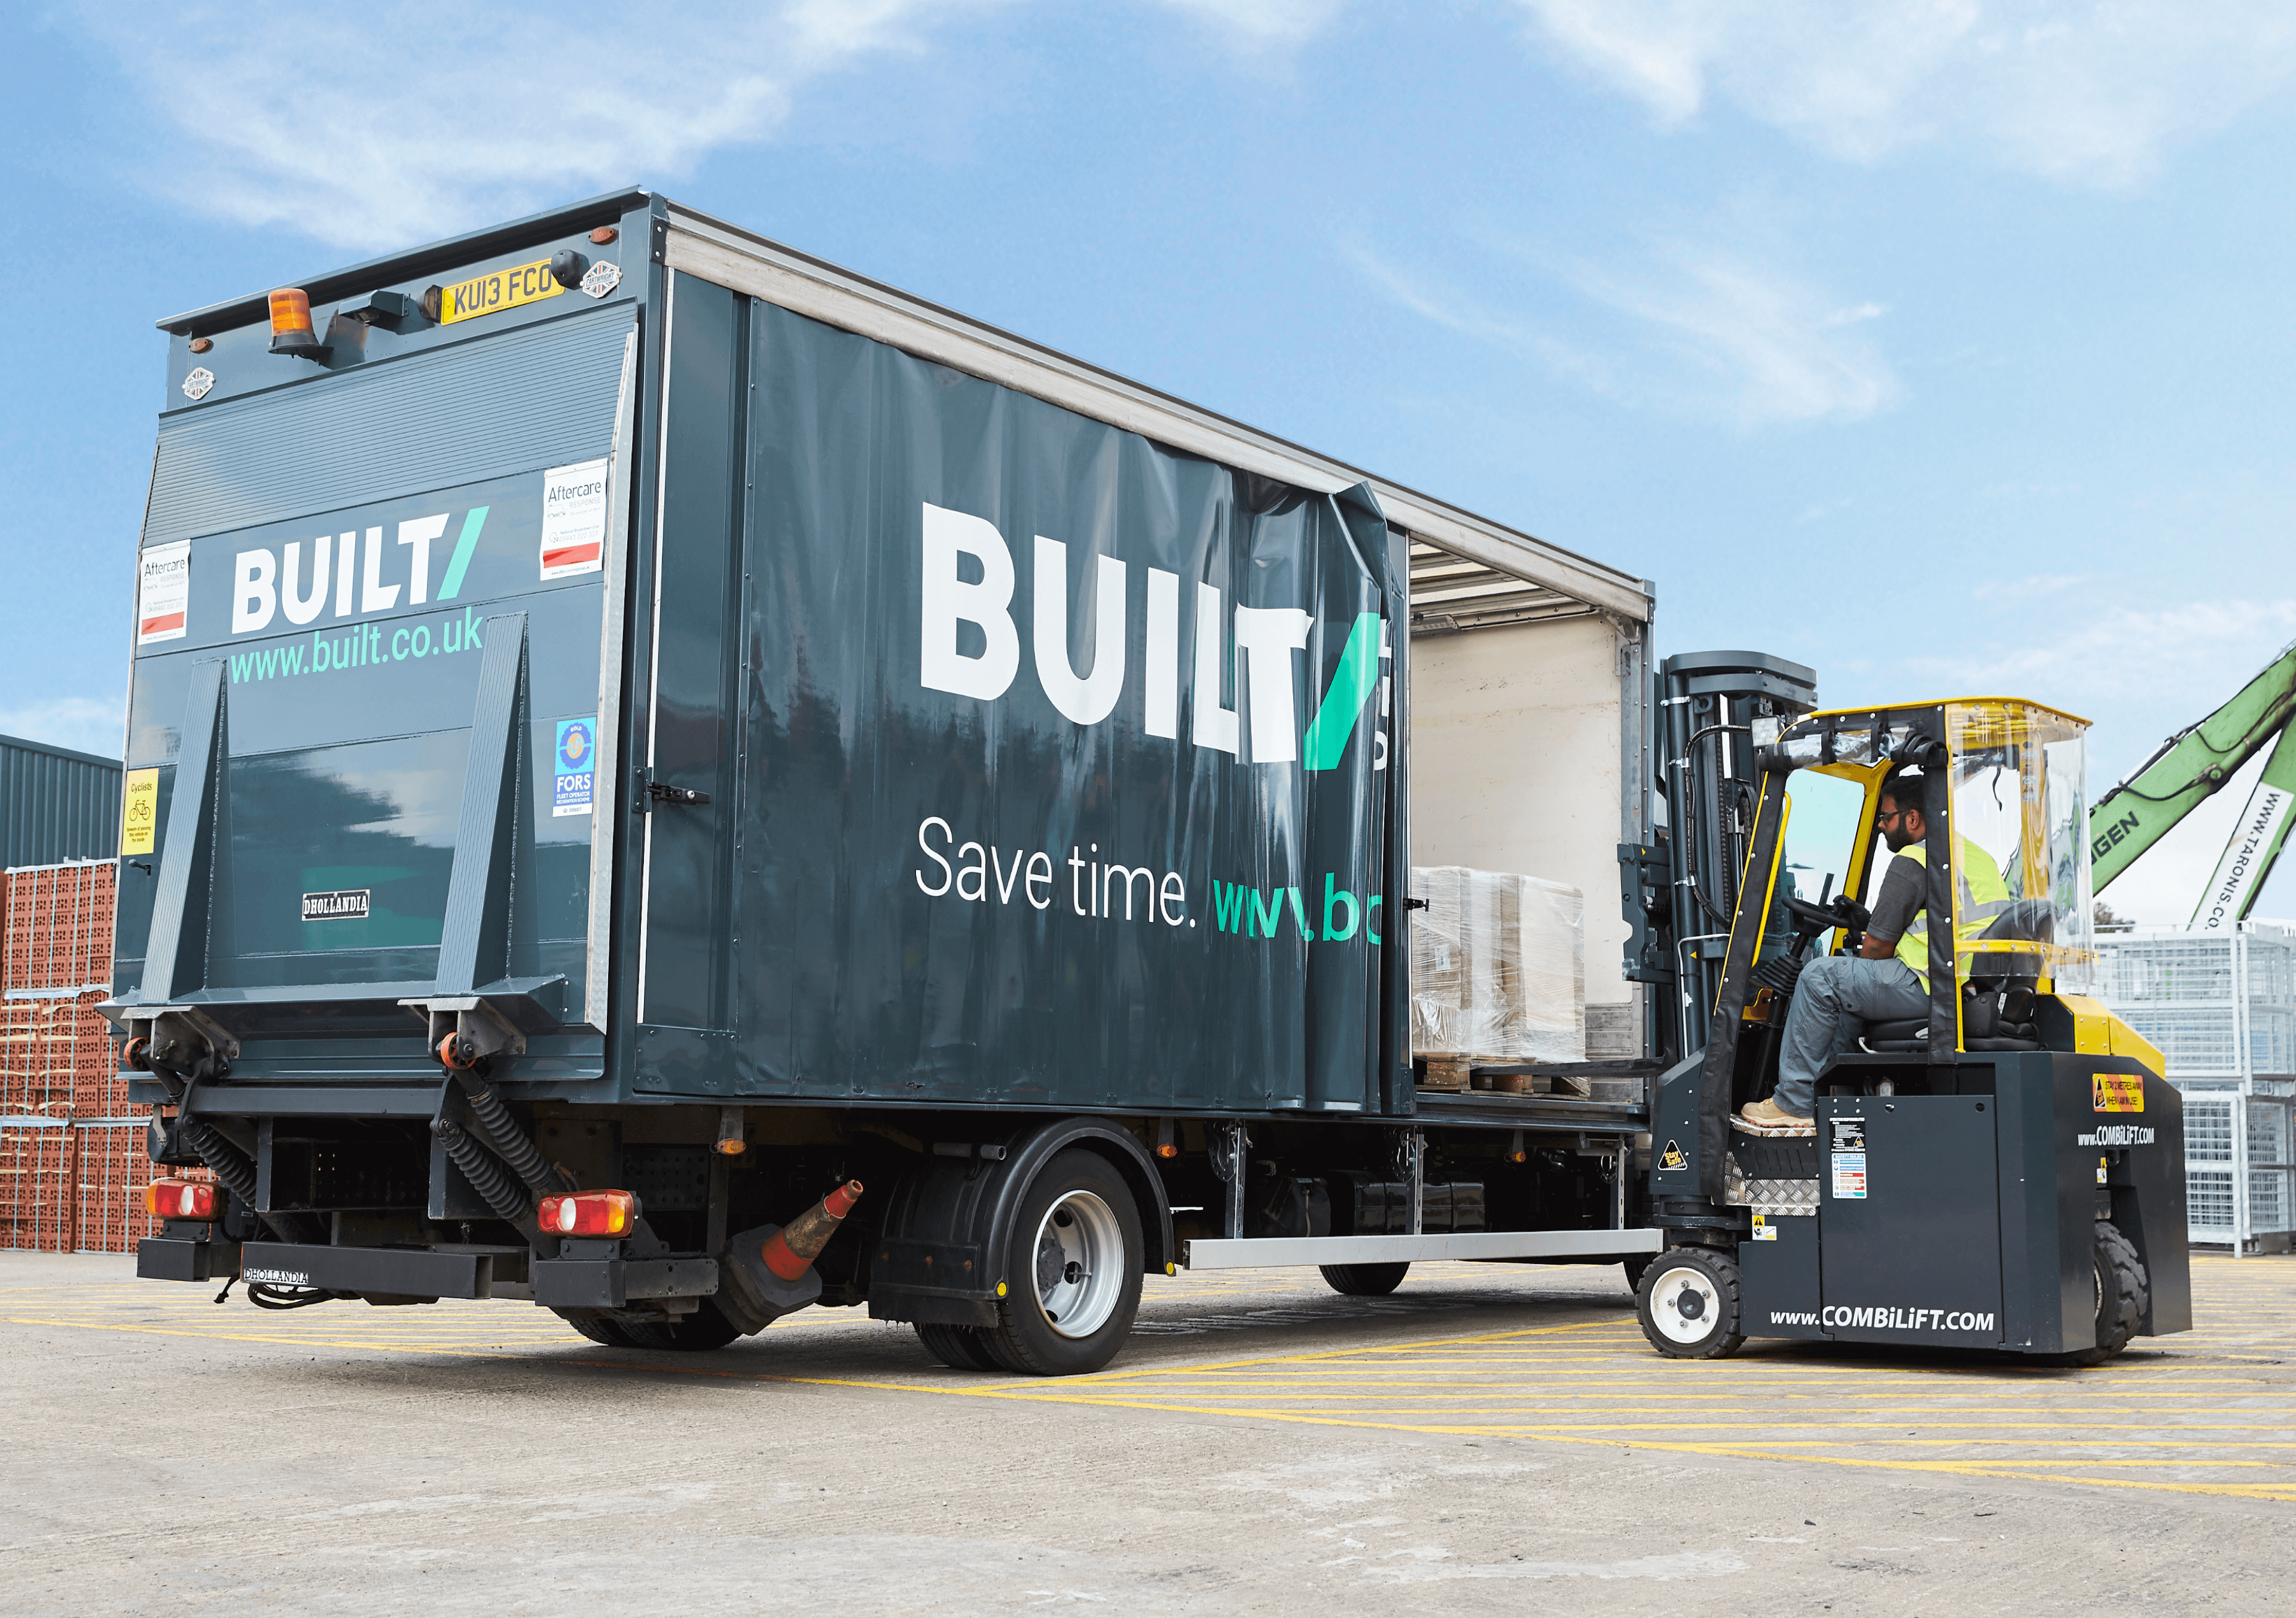 Built builders merchant branded delivery truck getting loaded by a forklift in an outdoor warehouse